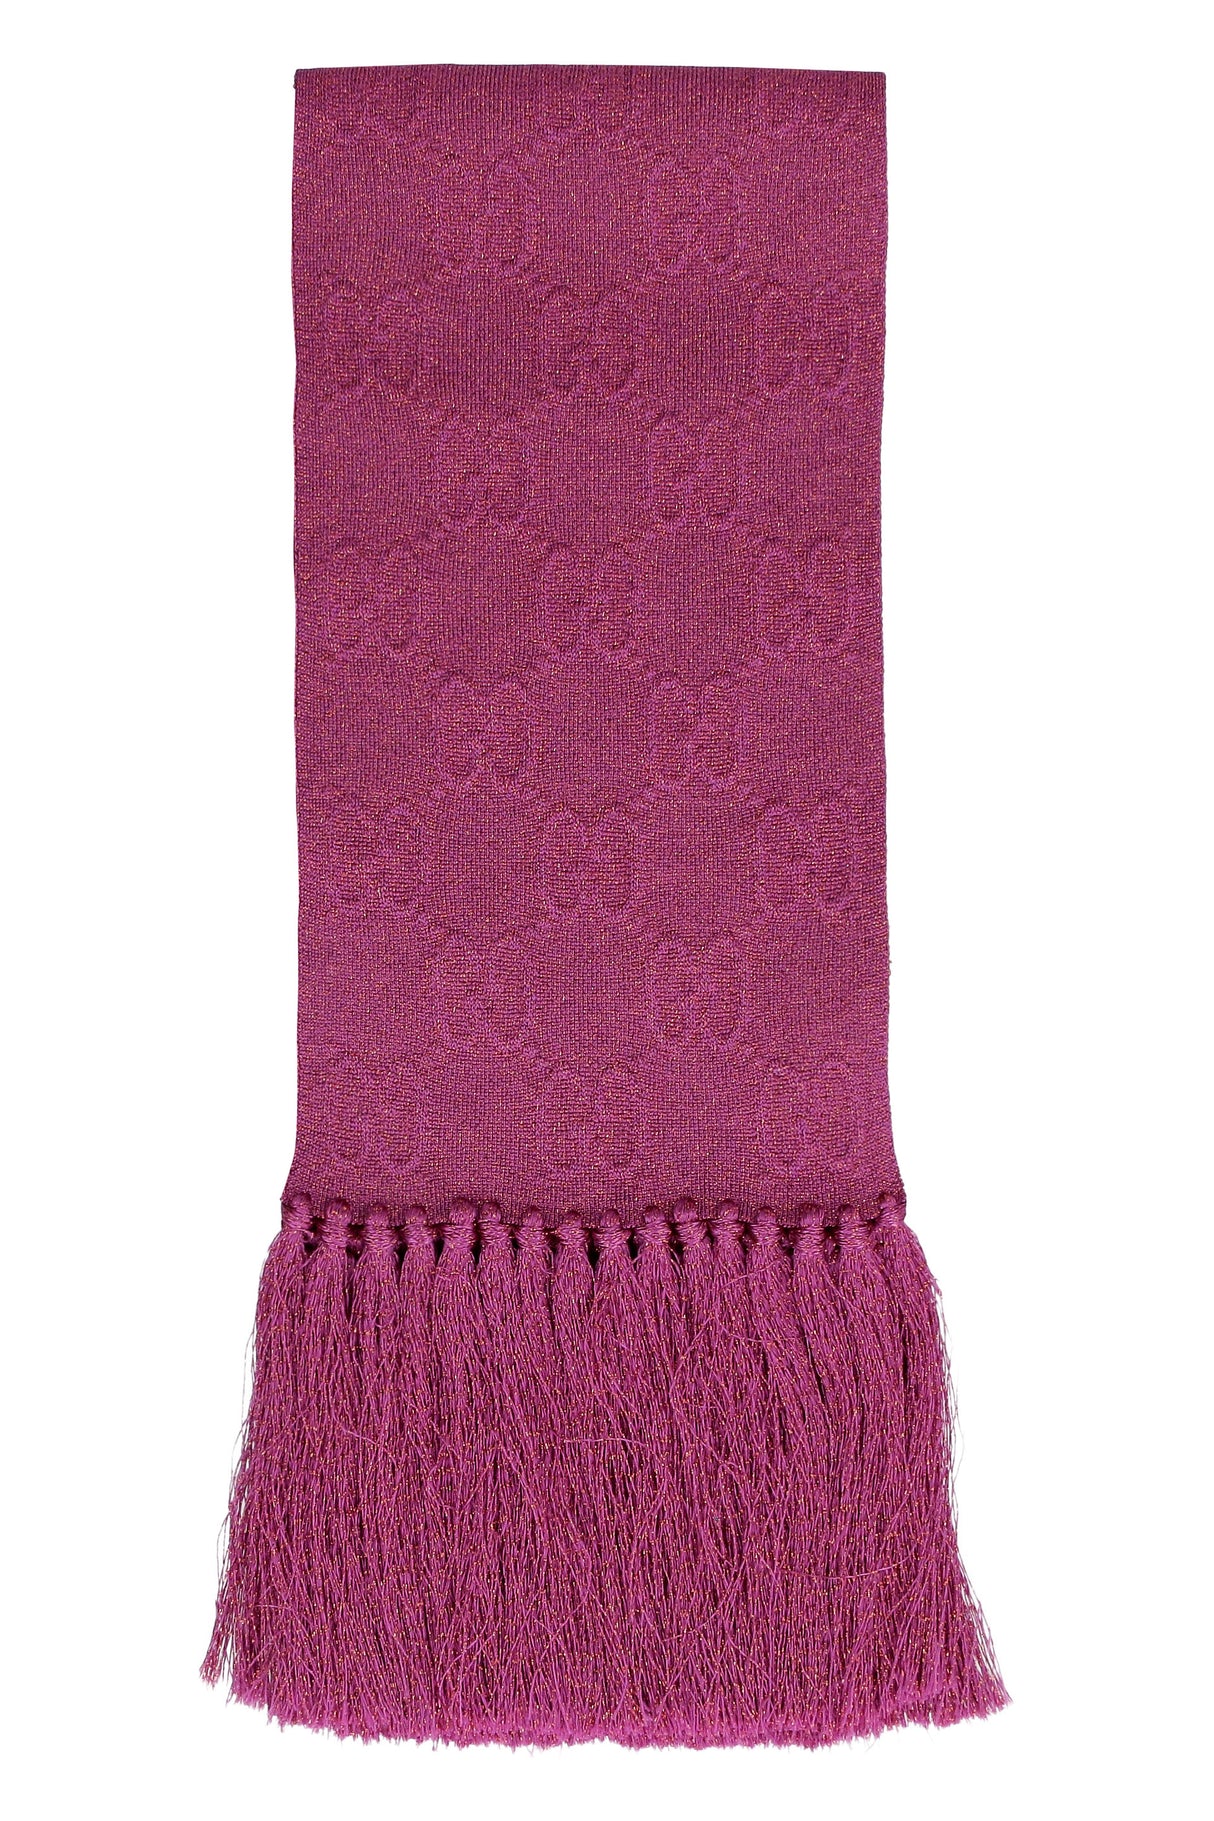 GUCCI Fringed Scarf in Fuchsia with Lurex Threads and Pink Accents